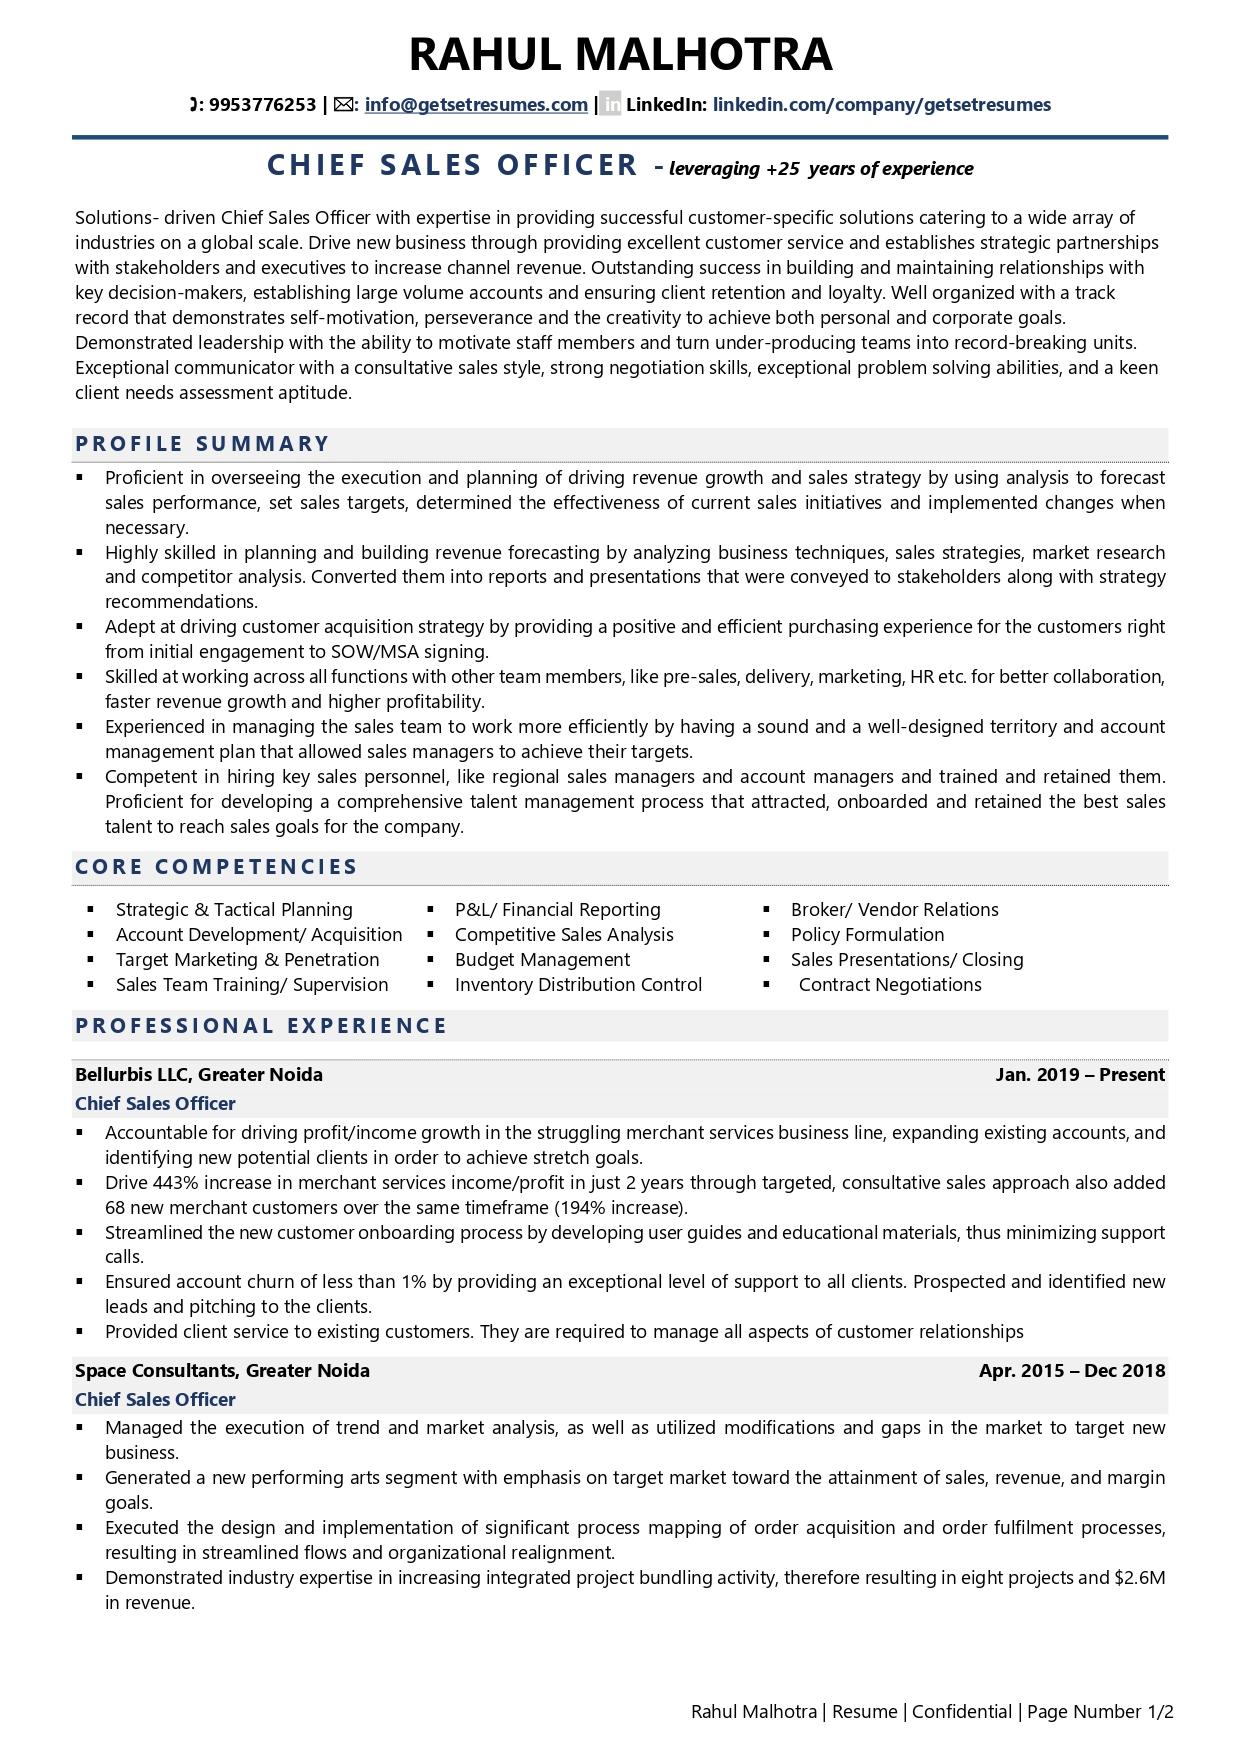 Chief Sales Officer - Resume Example & Template